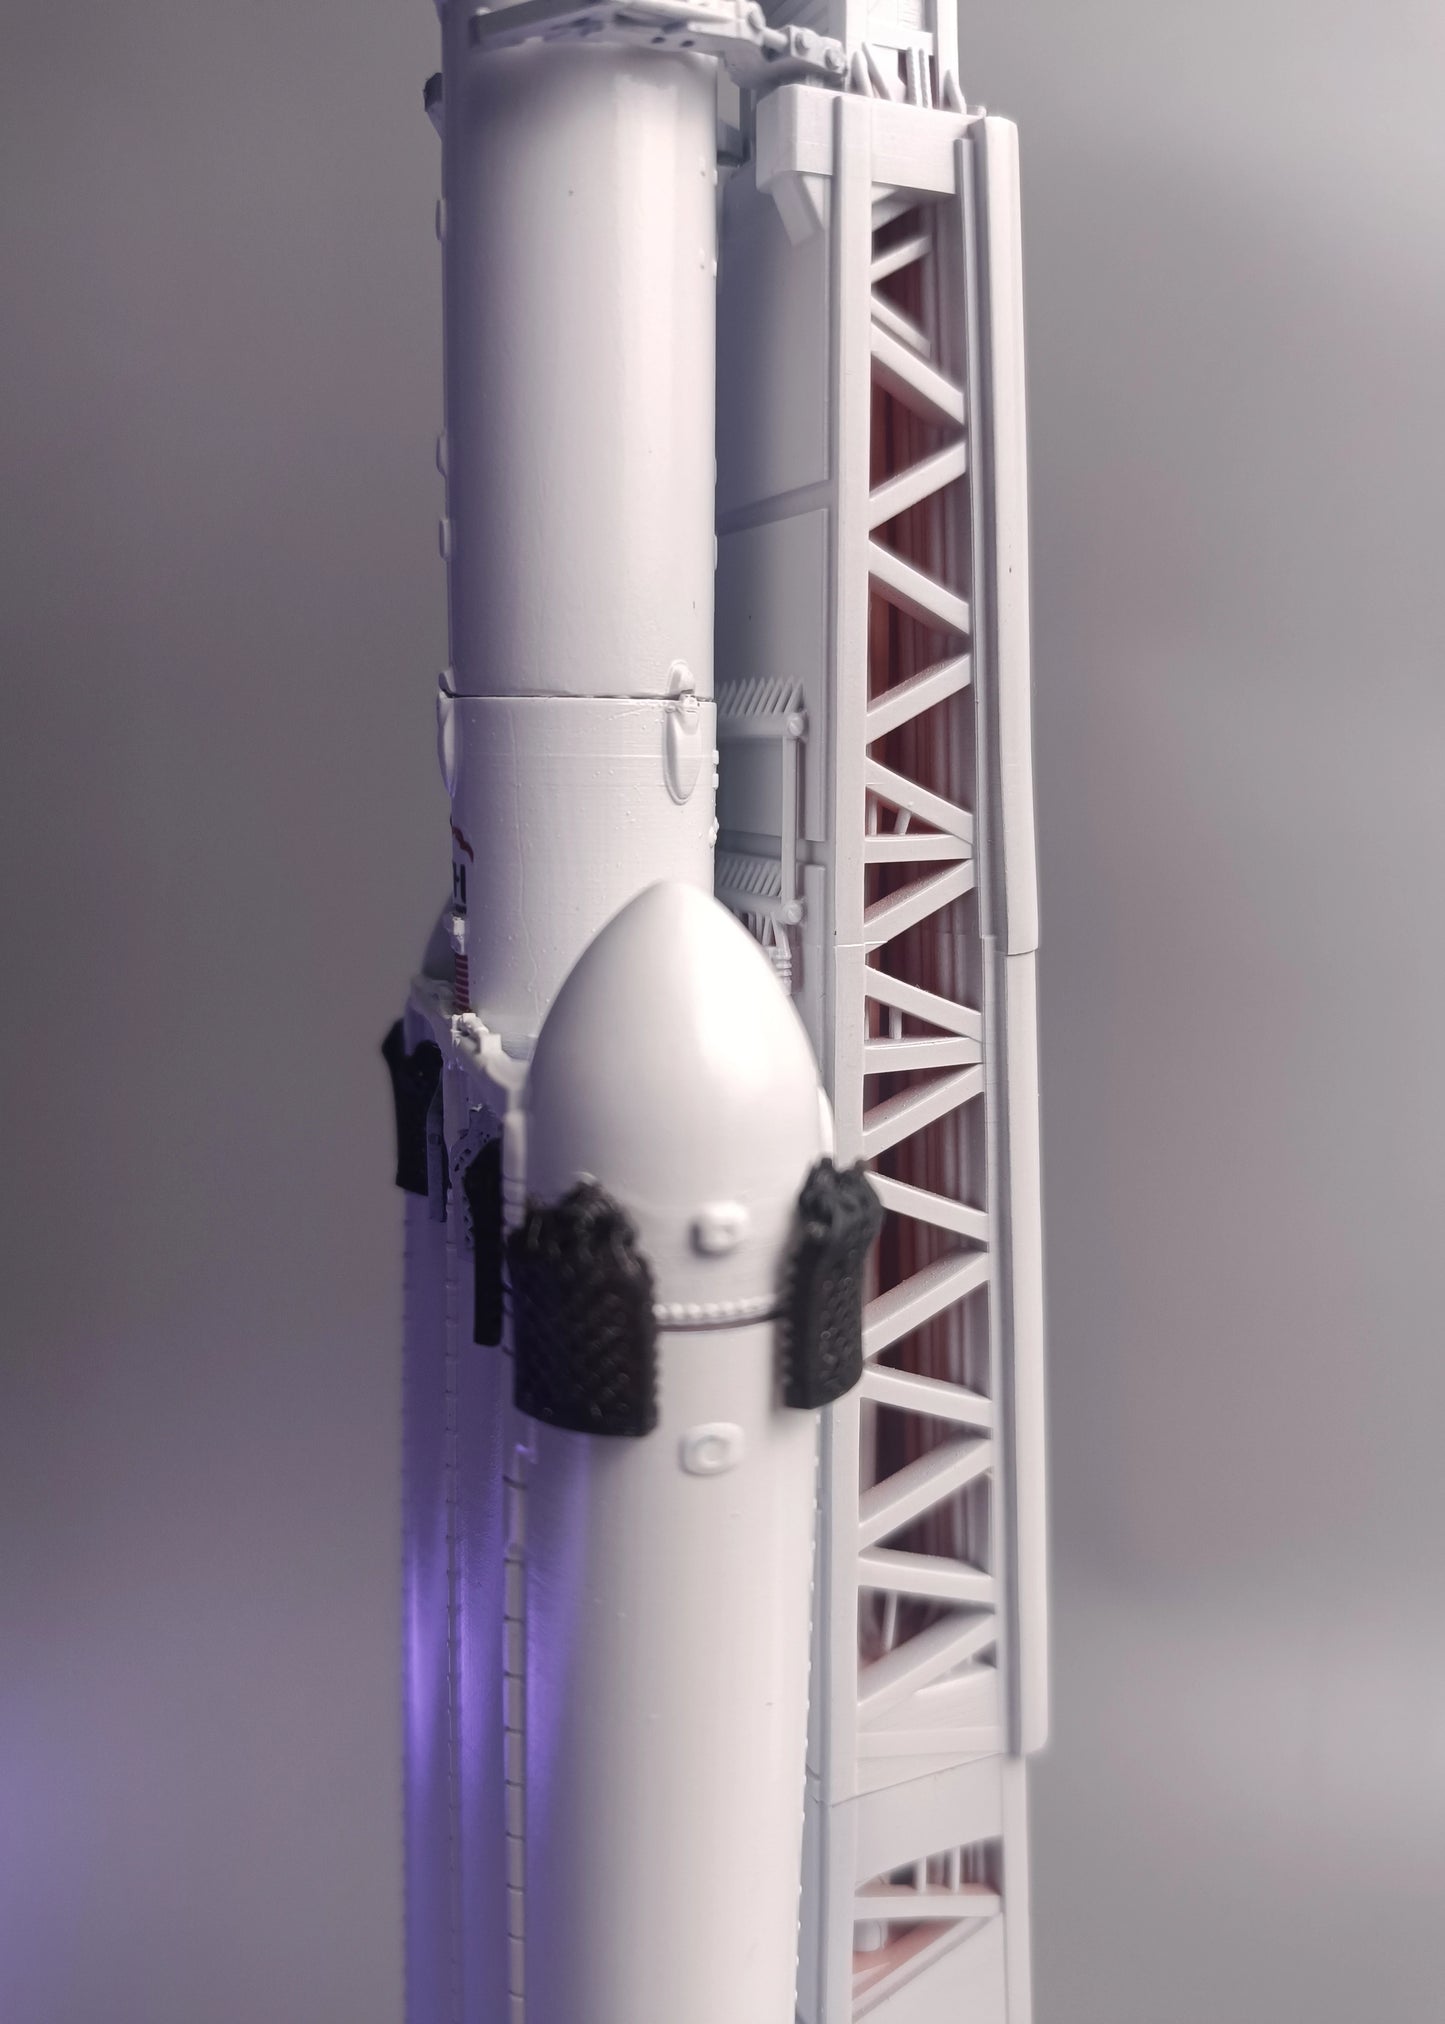 Grid rudders on the first stage of the Falcon Heavy rocket. SpaceX rocket model in 1:200 scale